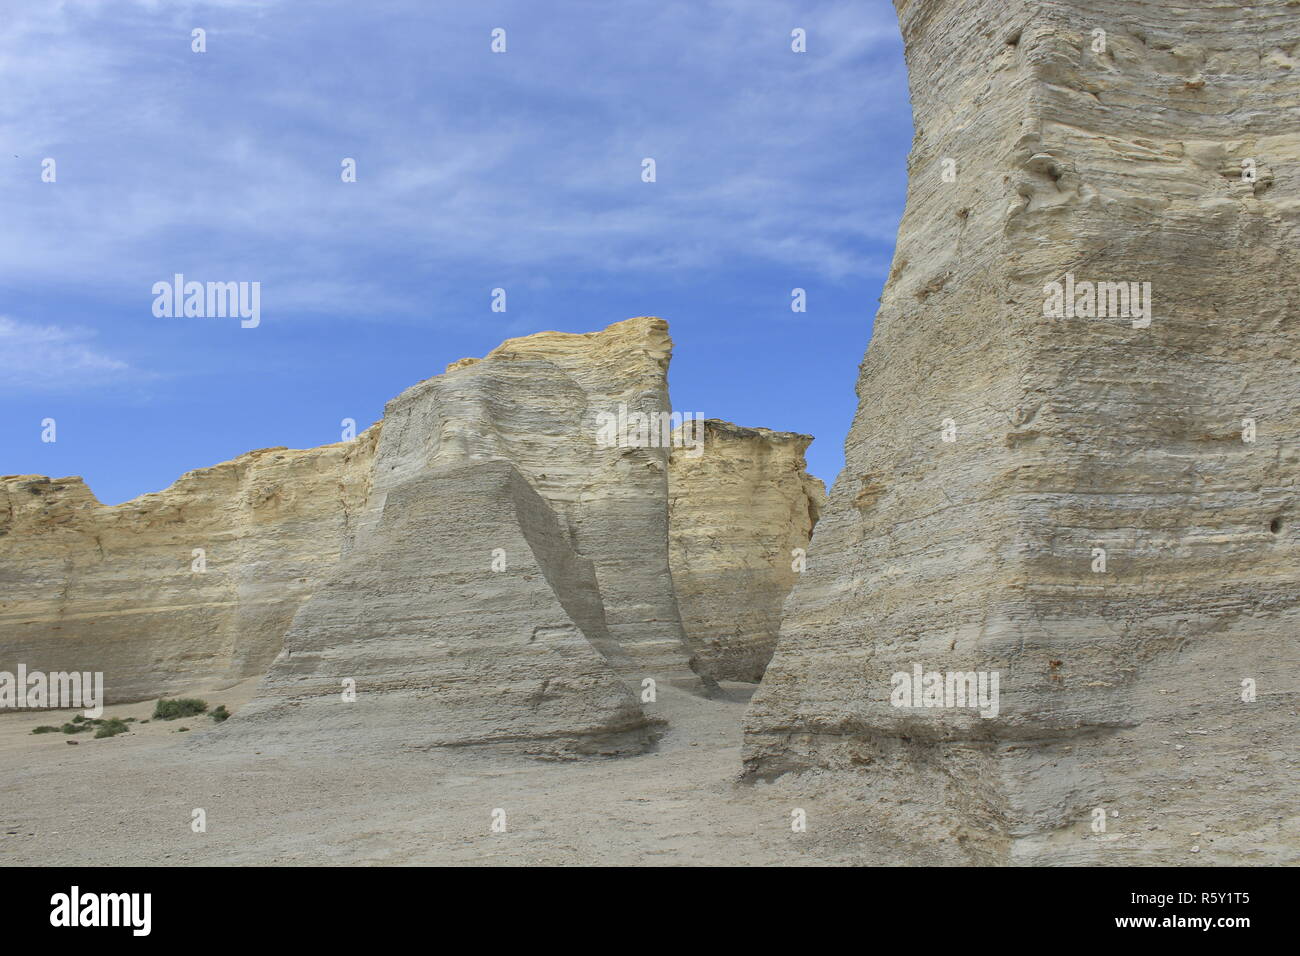 Monument Rock in Western Kansas with blue sky and clouds. Stock Photo